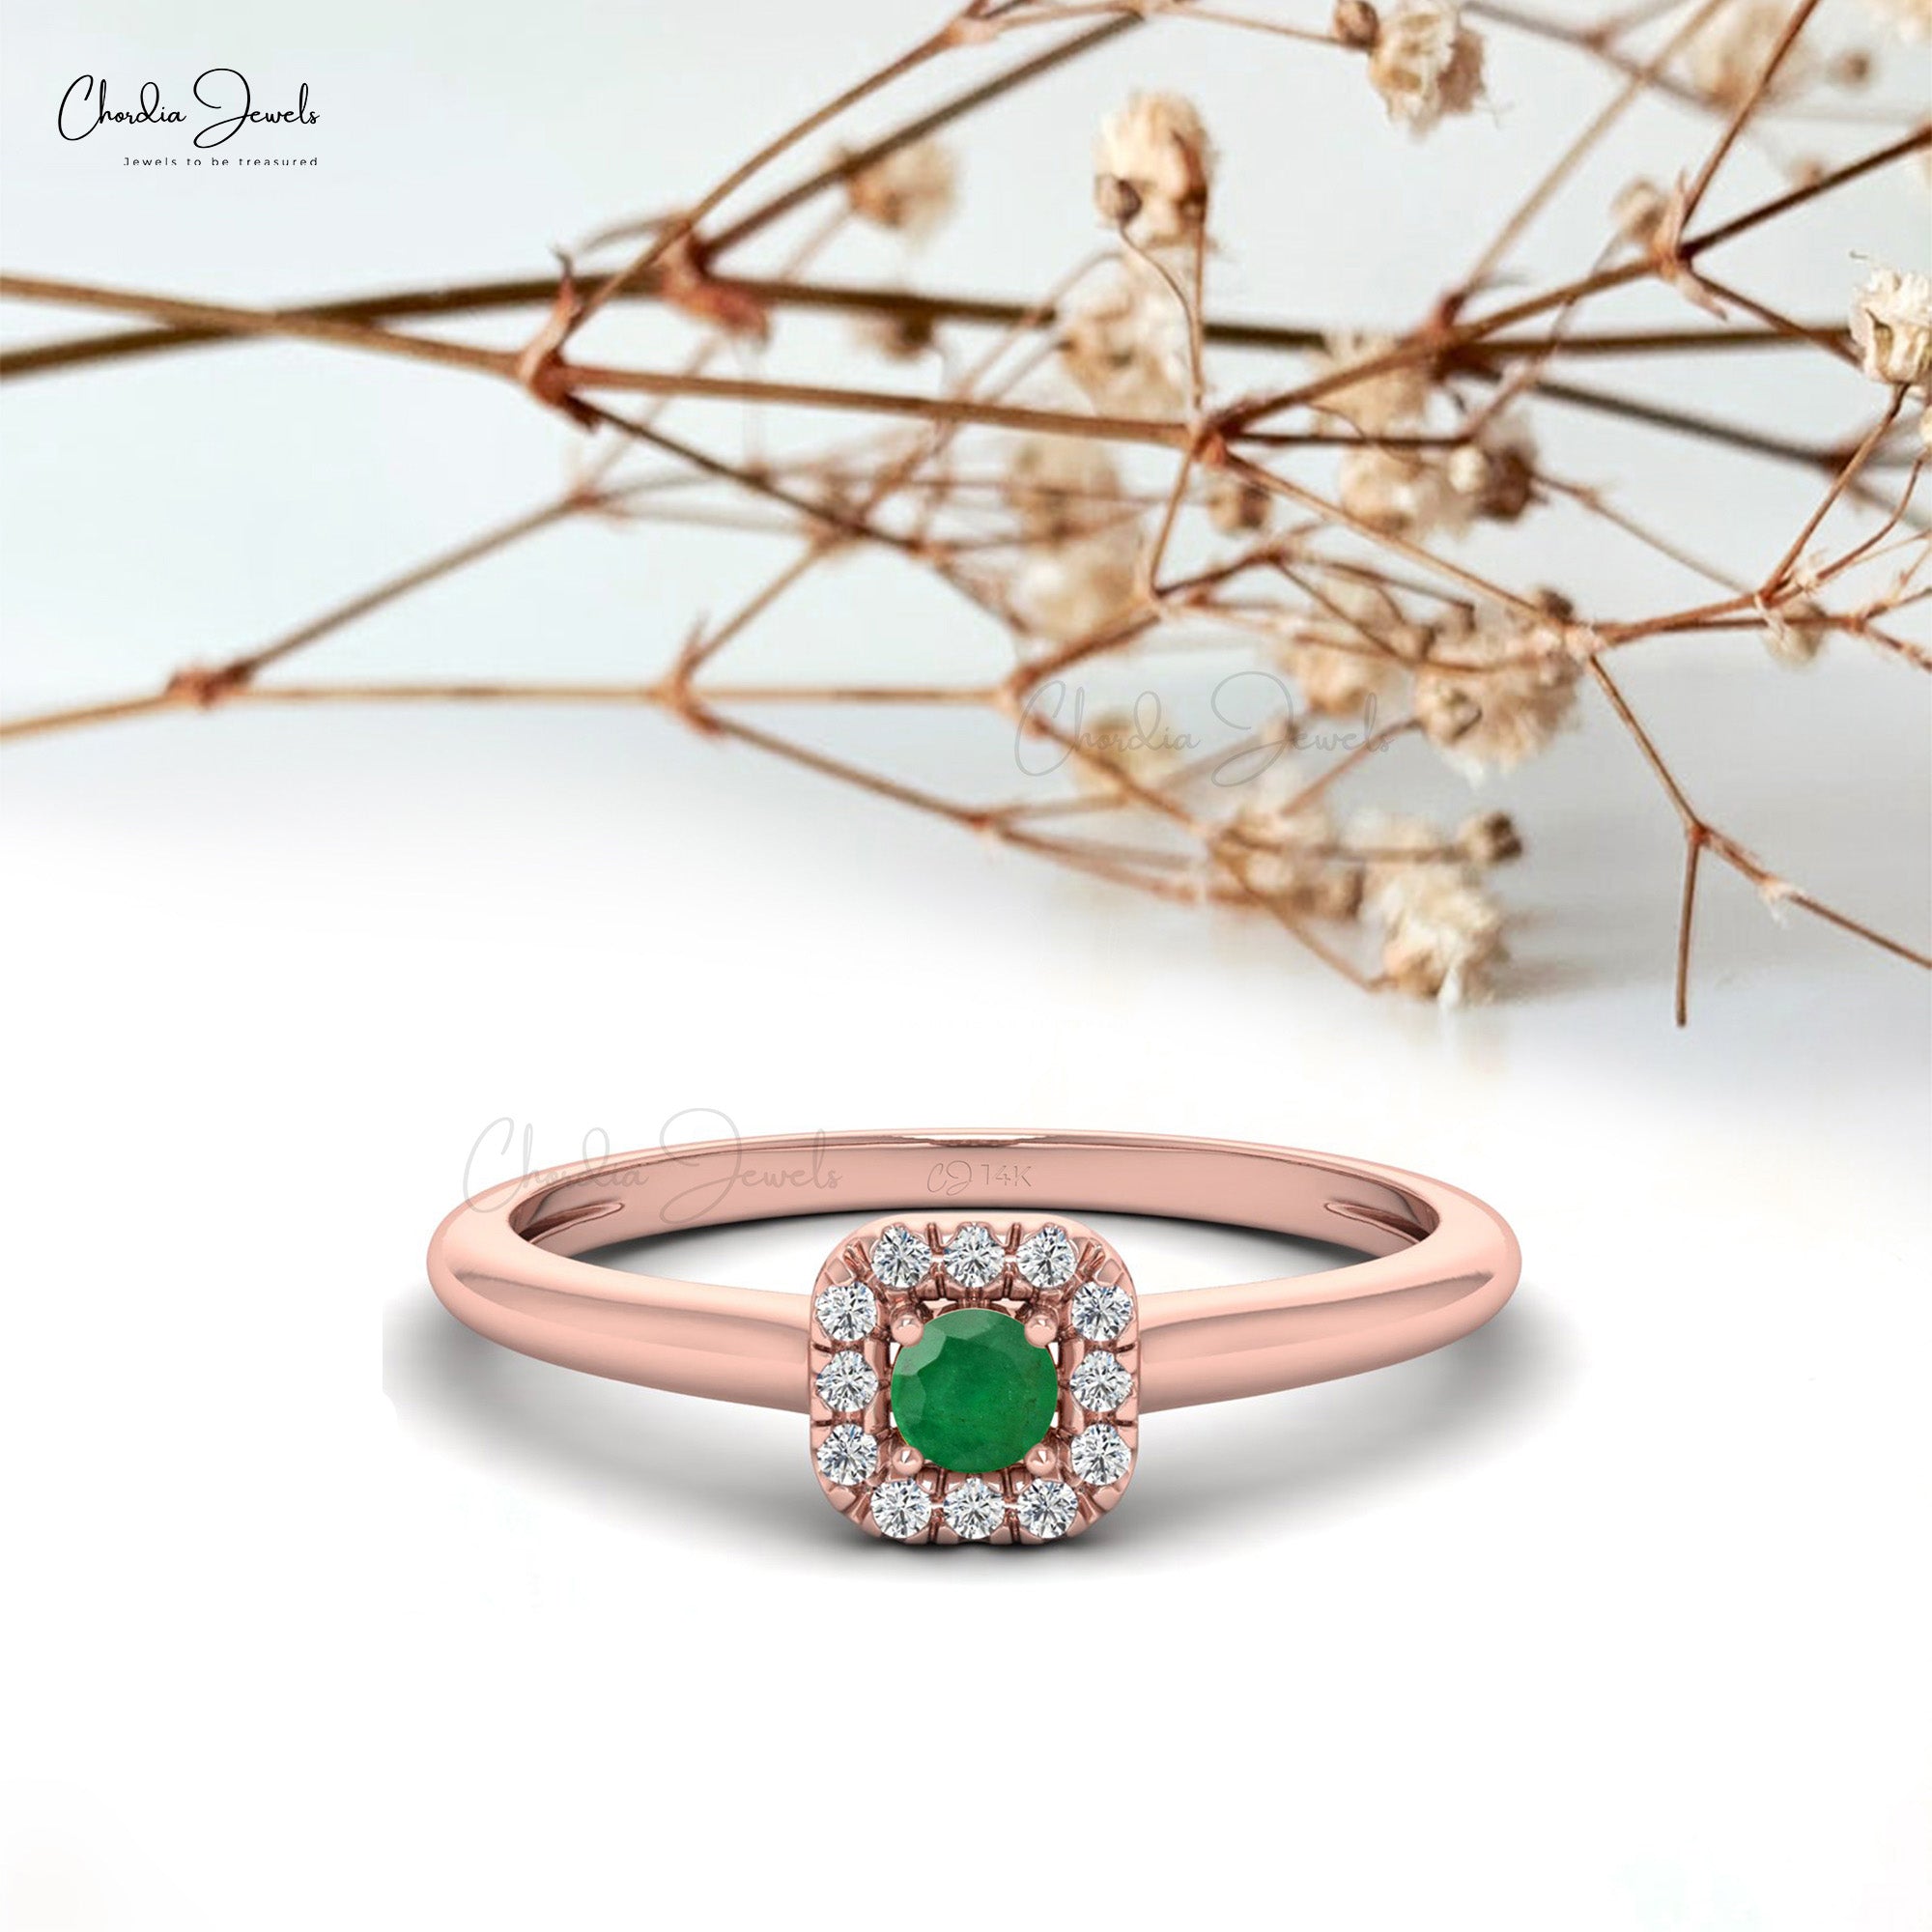 Ruby and Emerald Classic Reversible Diamond Ring - Chris Jewels